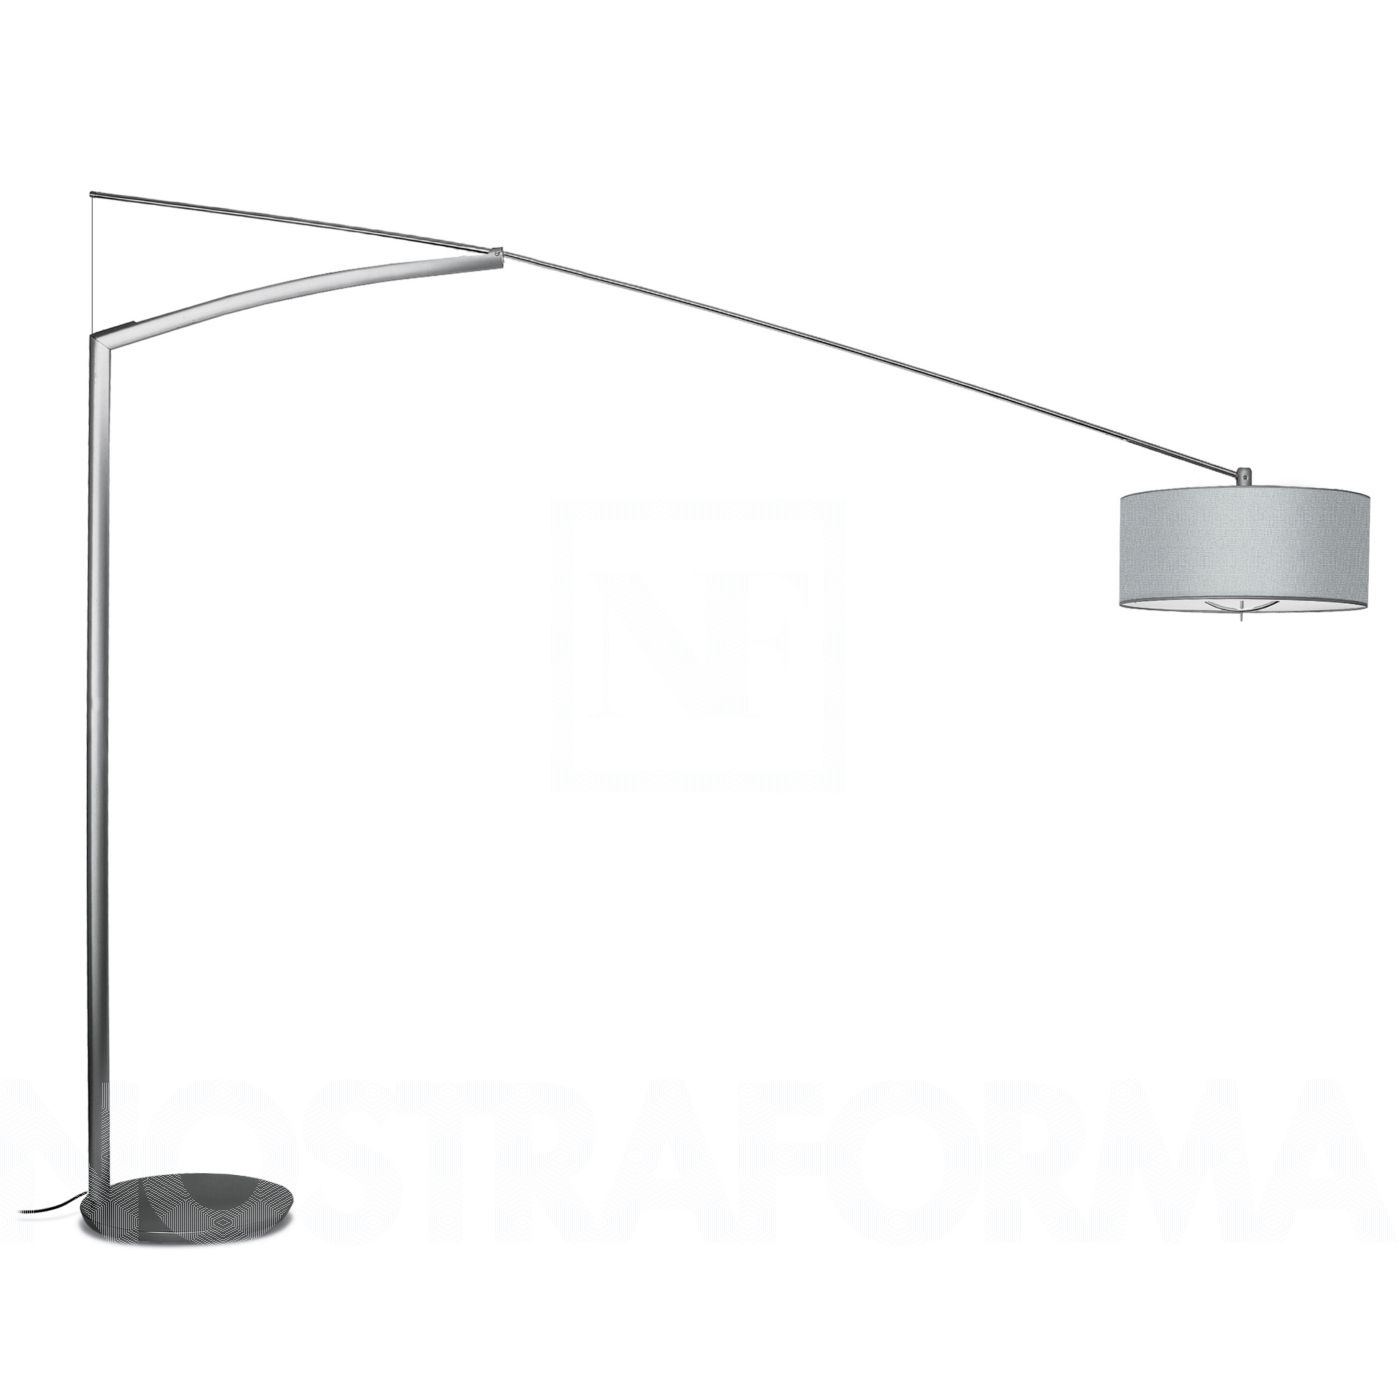 Vibia Balance 5189 Floor Lamp intended for size 1400 X 1400